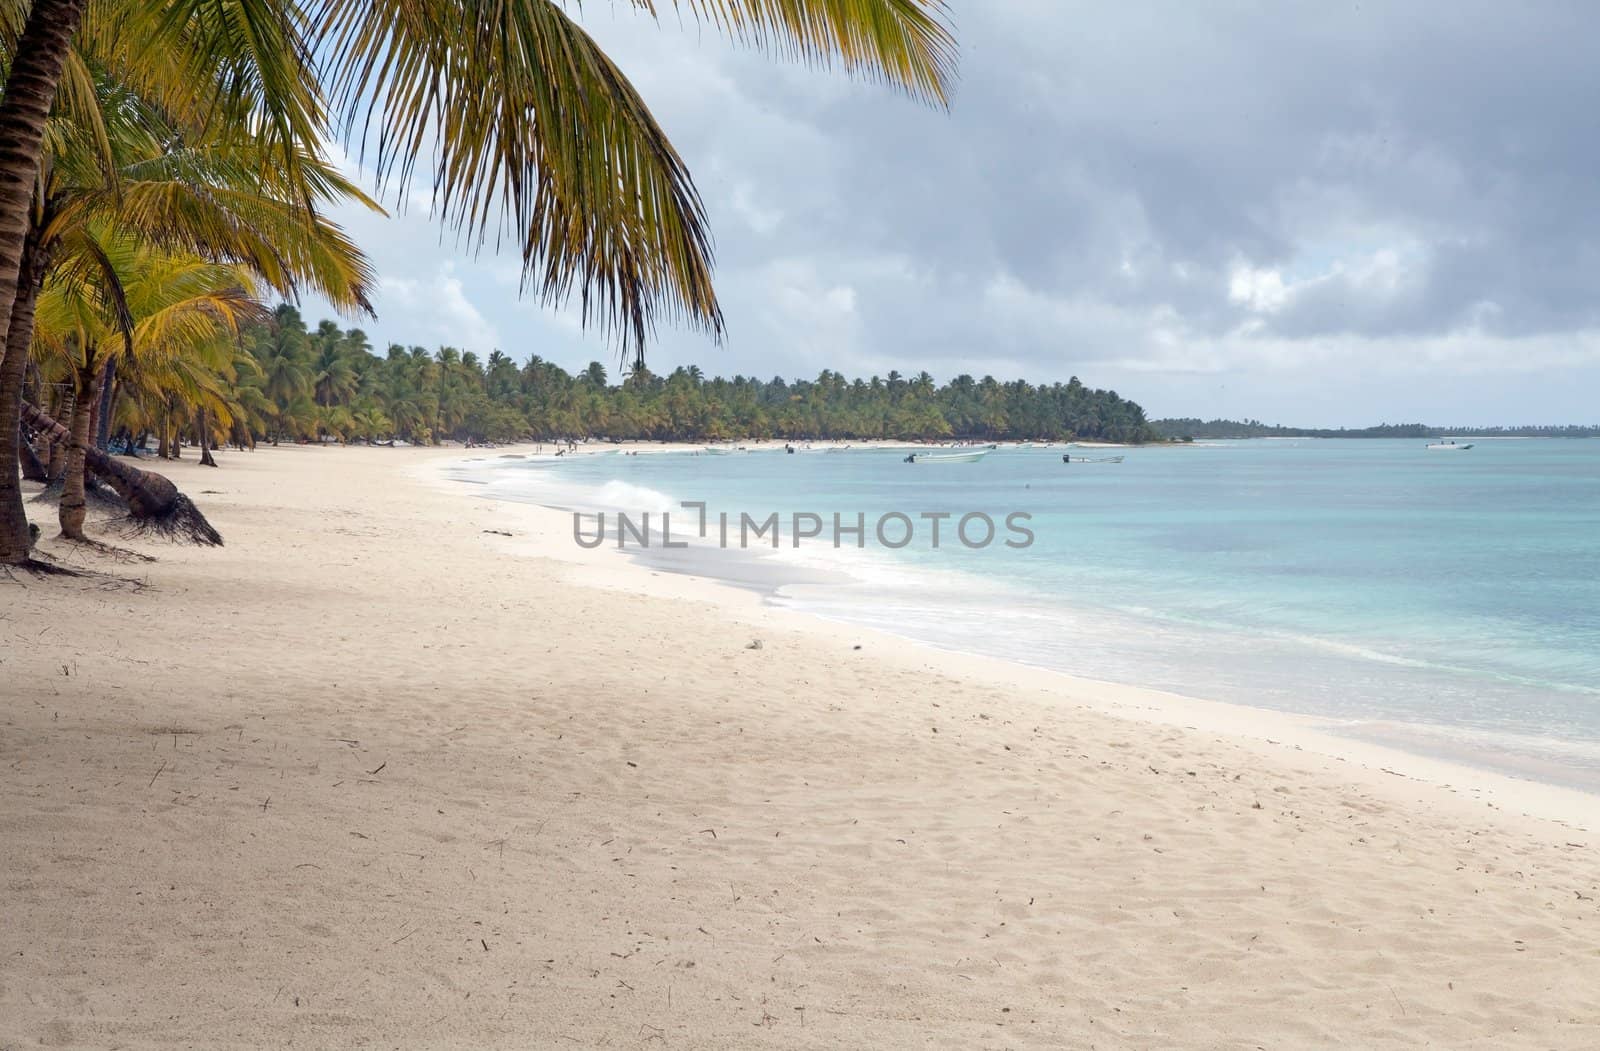 Saona island beach, Dominican Republic, with white sand and palm trees with boat and ocean